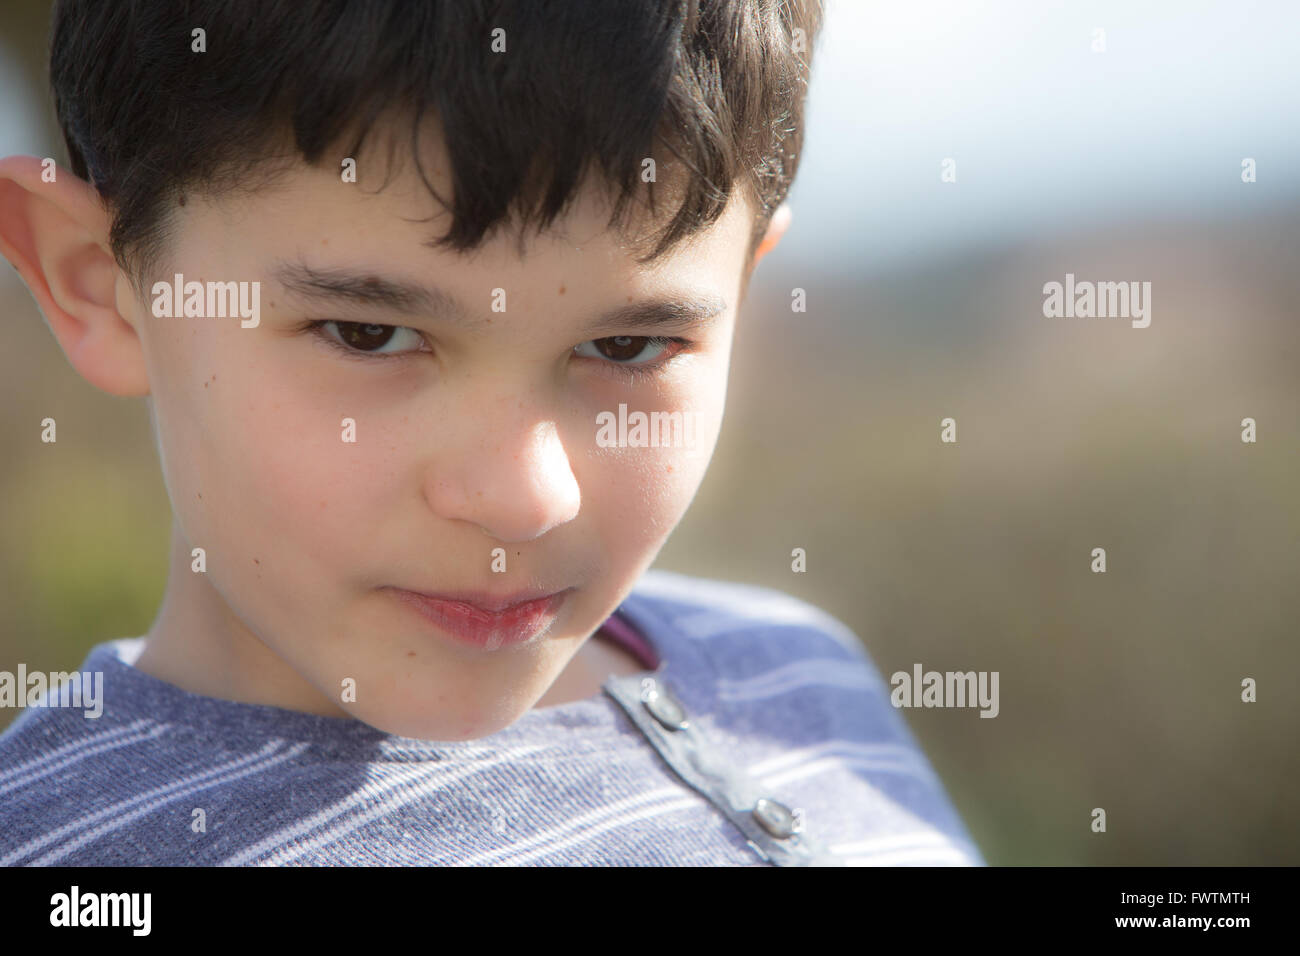 Boy looking cheeky and mischievous Stock Photo